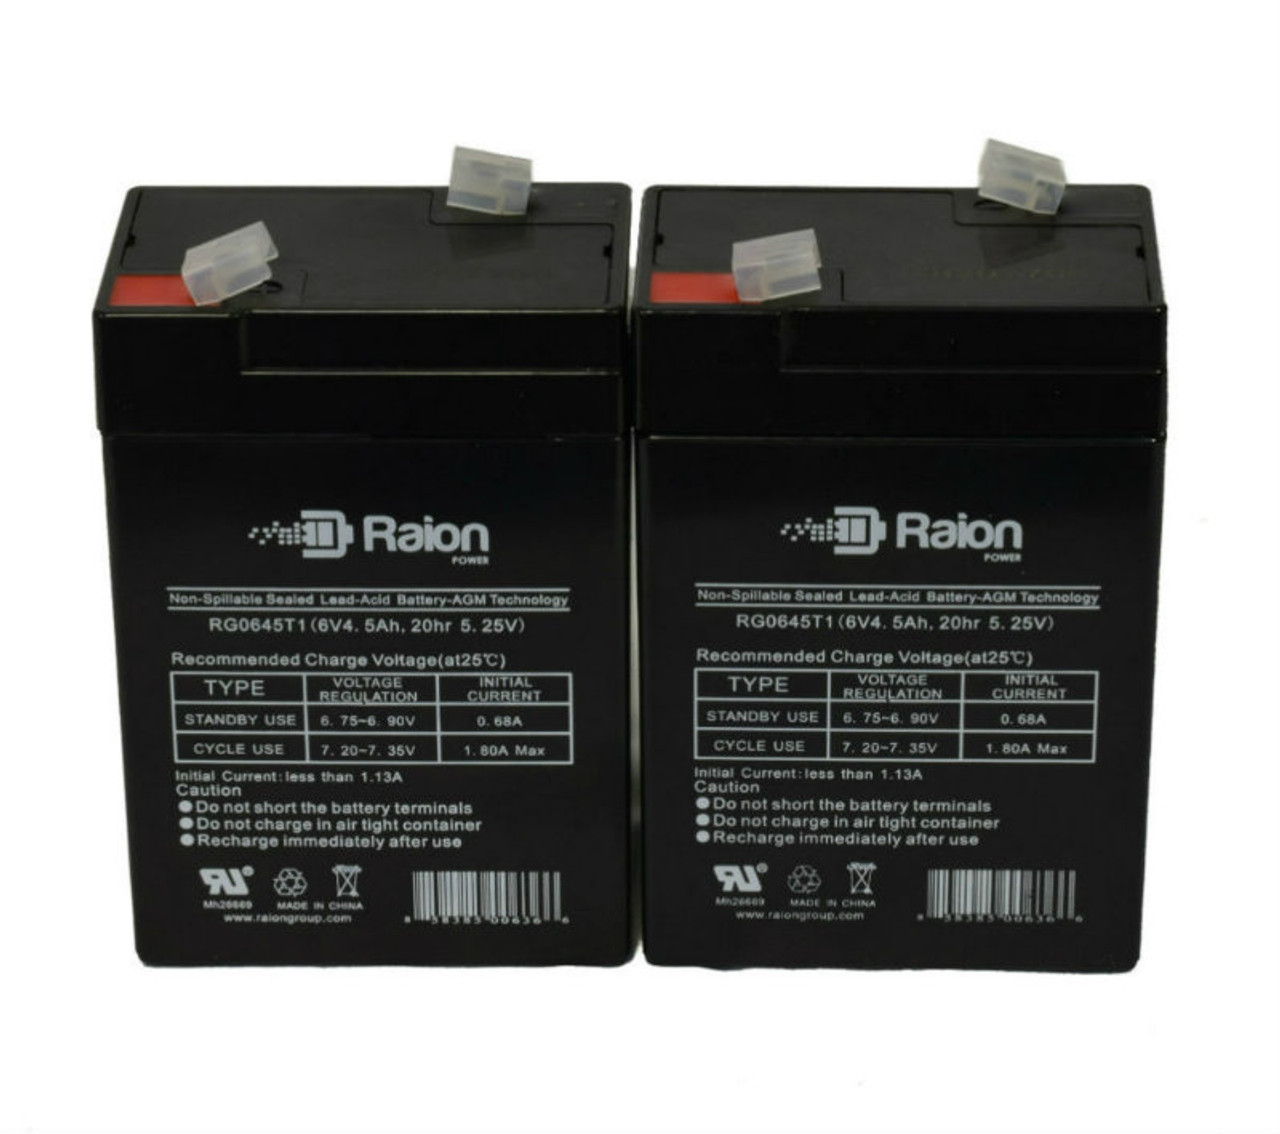 Raion Power 6V 4.5Ah Replacement Emergency Light Battery for Lithonia AQM - 2 Pack